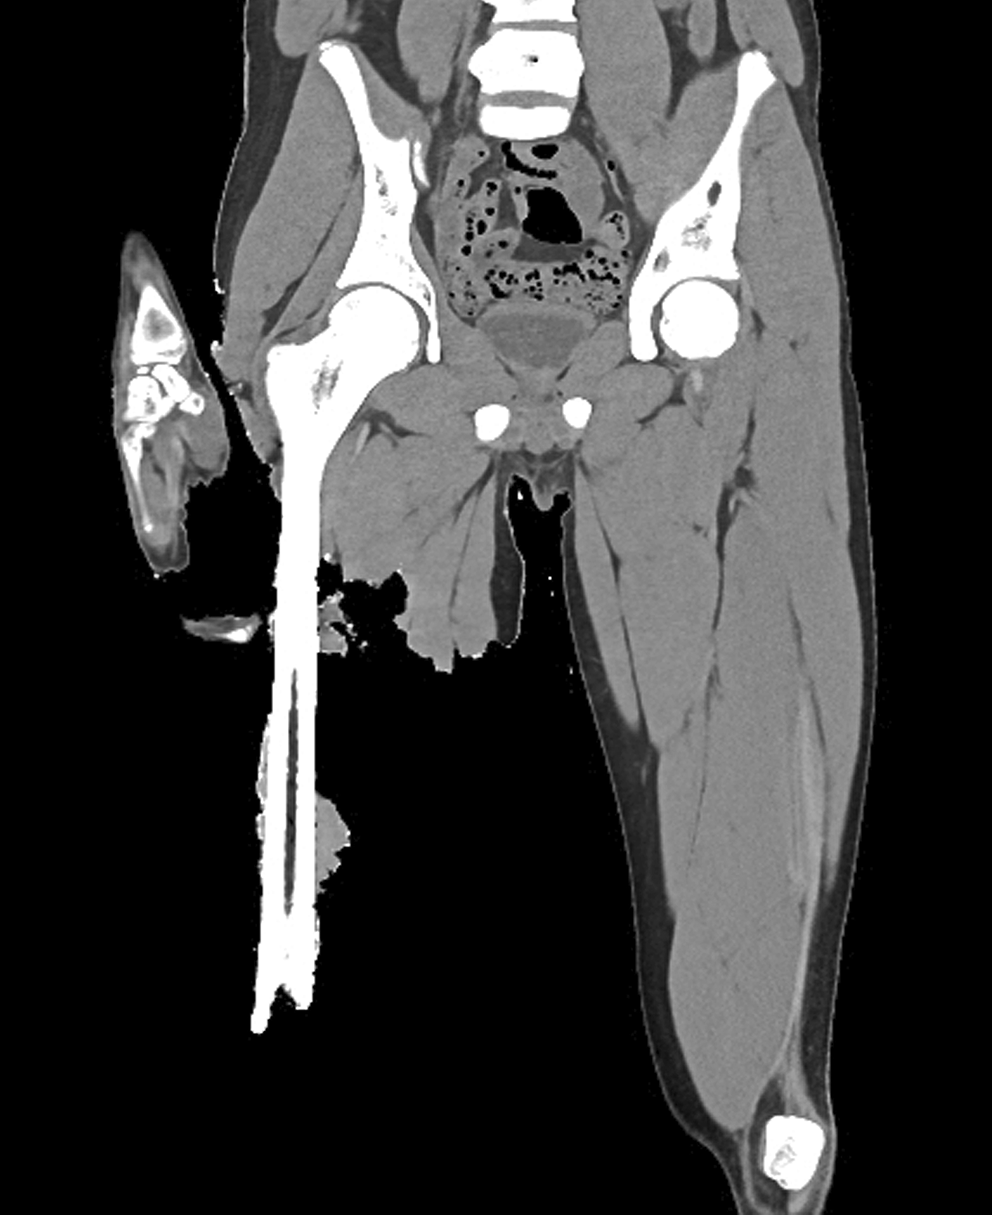 Identifying and documenting osseous trauma from shark attacks by post mortem CT examination and autopsy